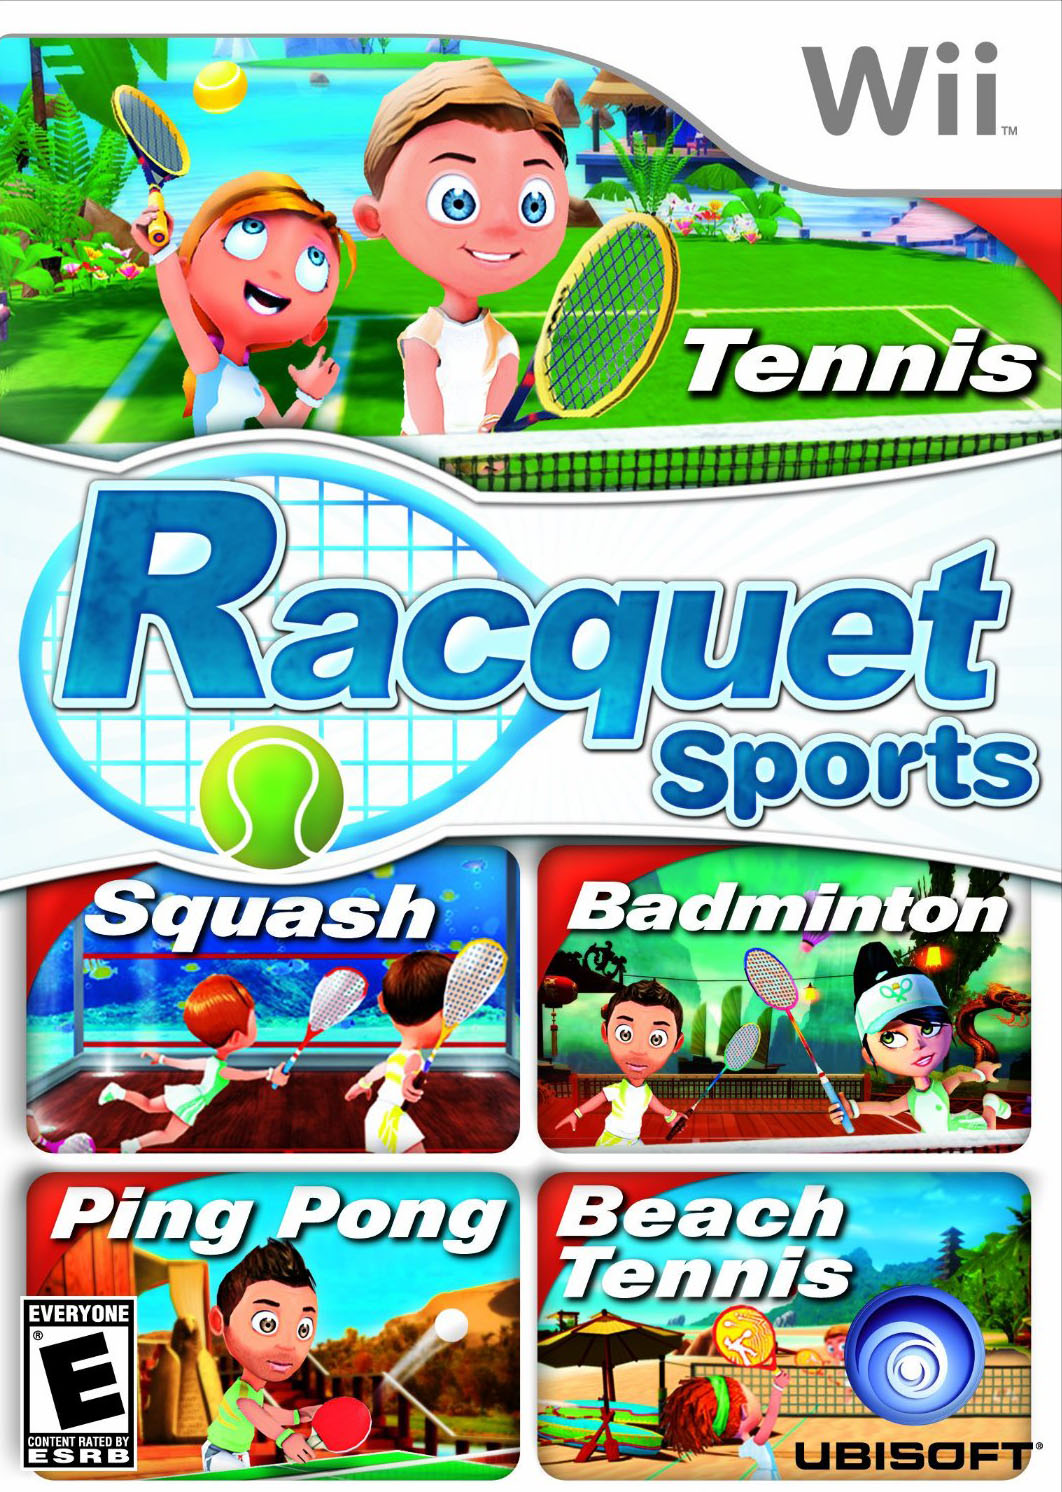 Racquet Sports - image 1 of 2